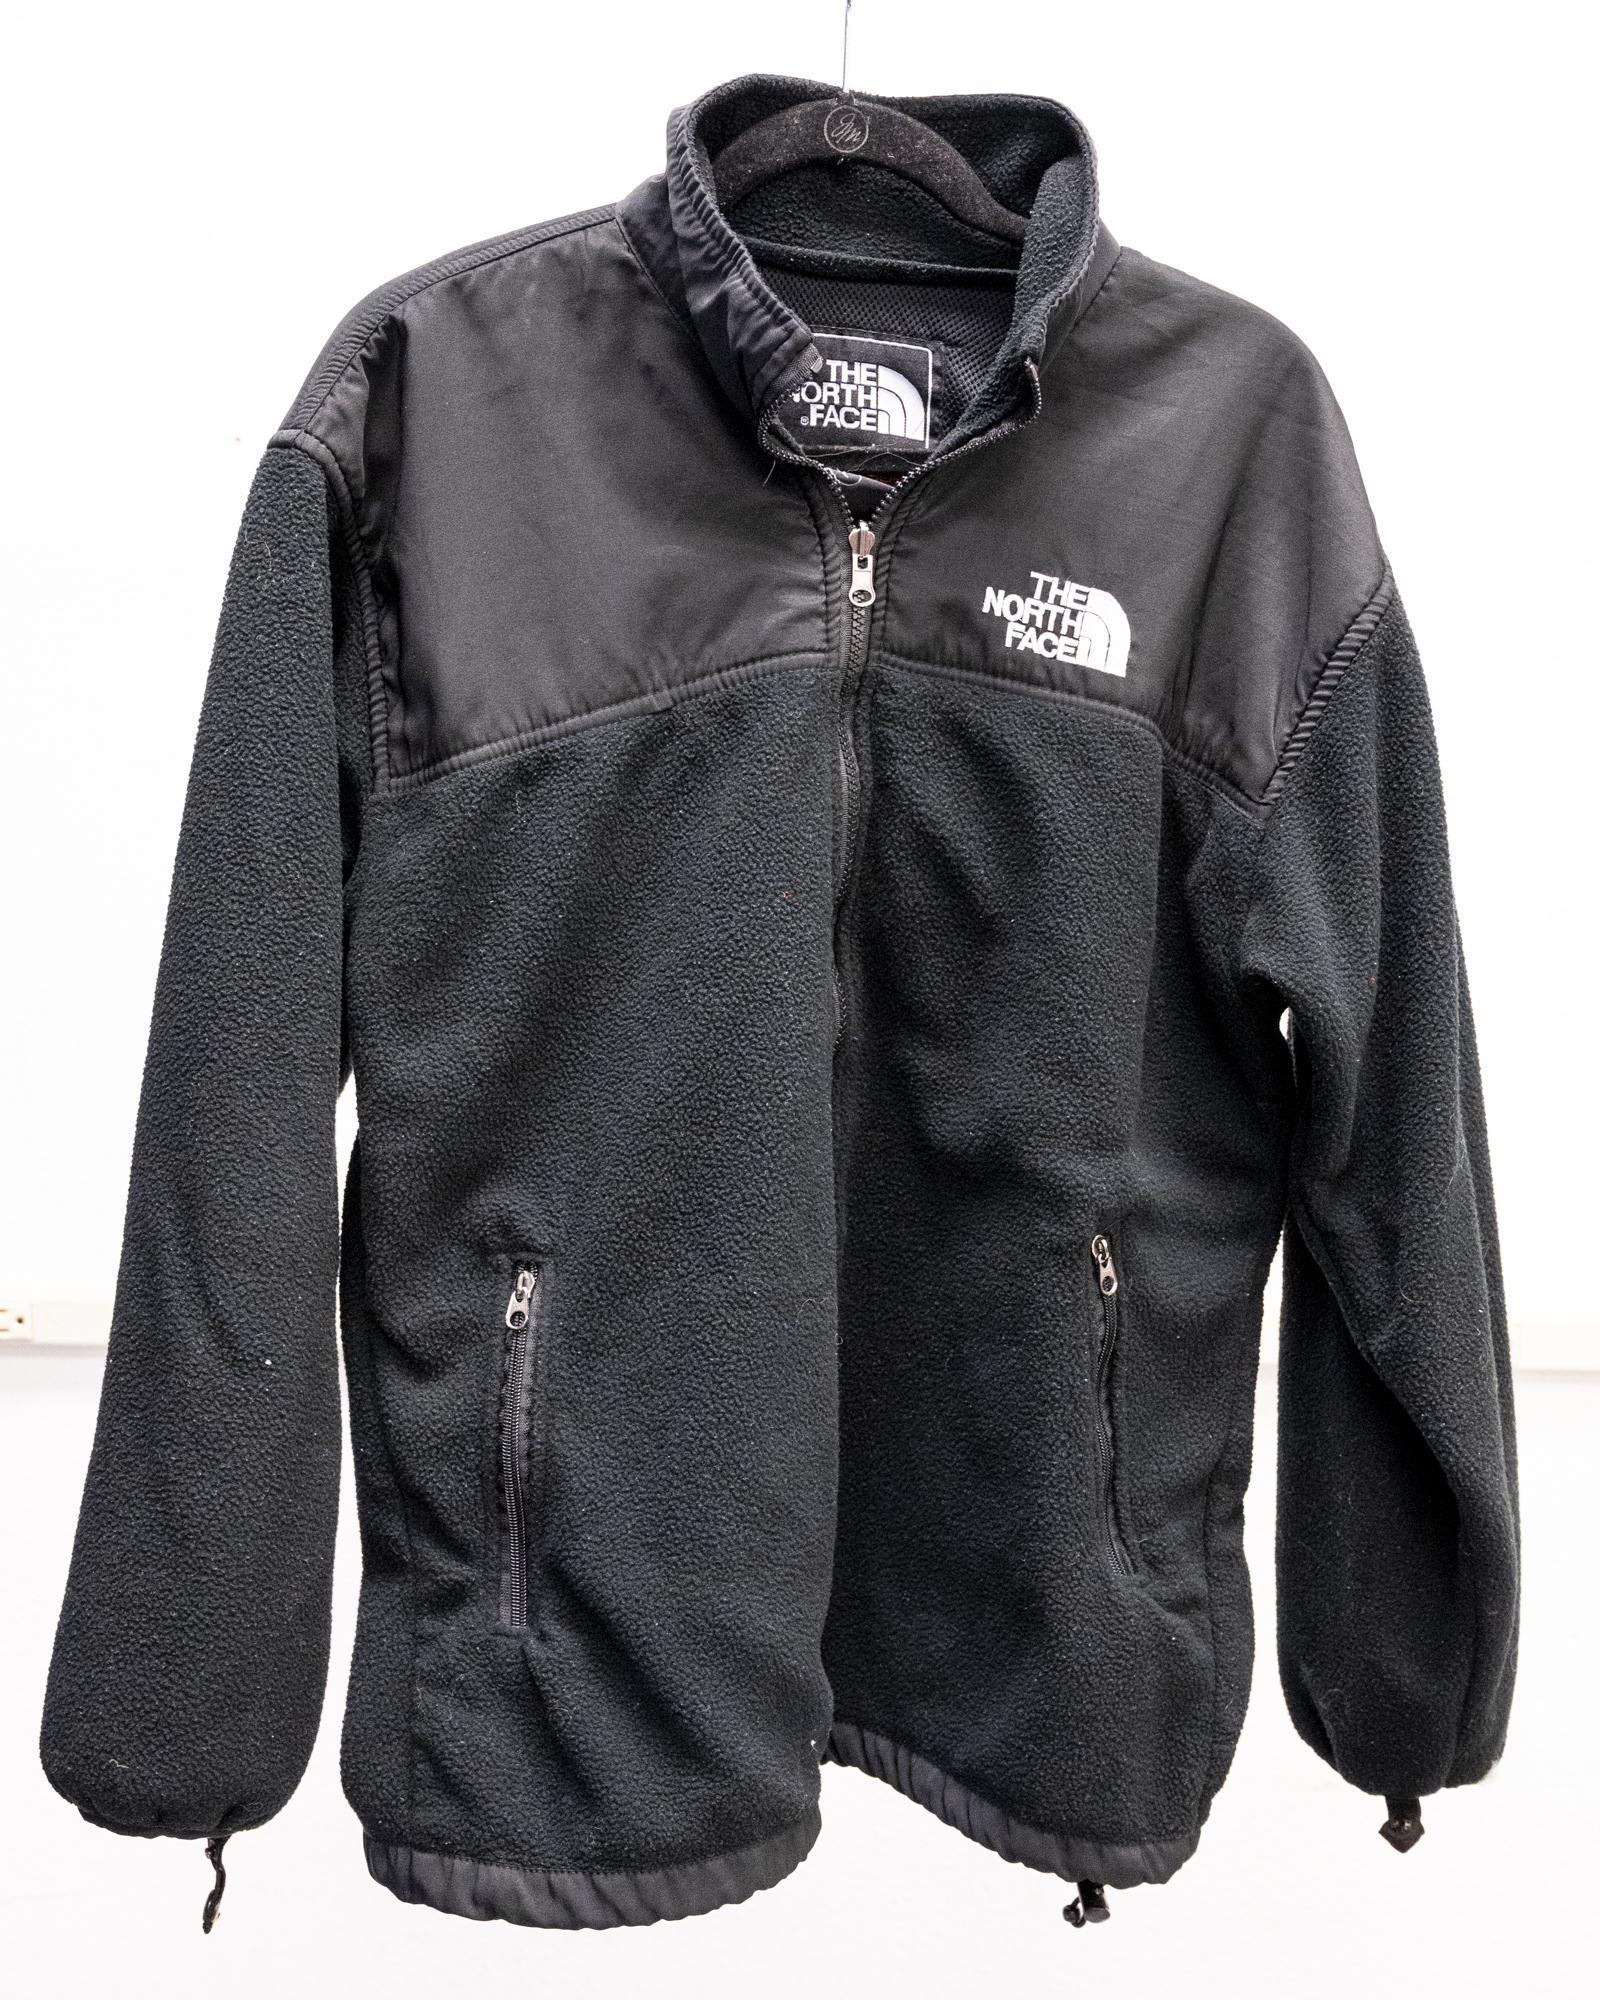 The North Face Fleece Jacket - Mens Extra Large - Boulder Mountain Repair